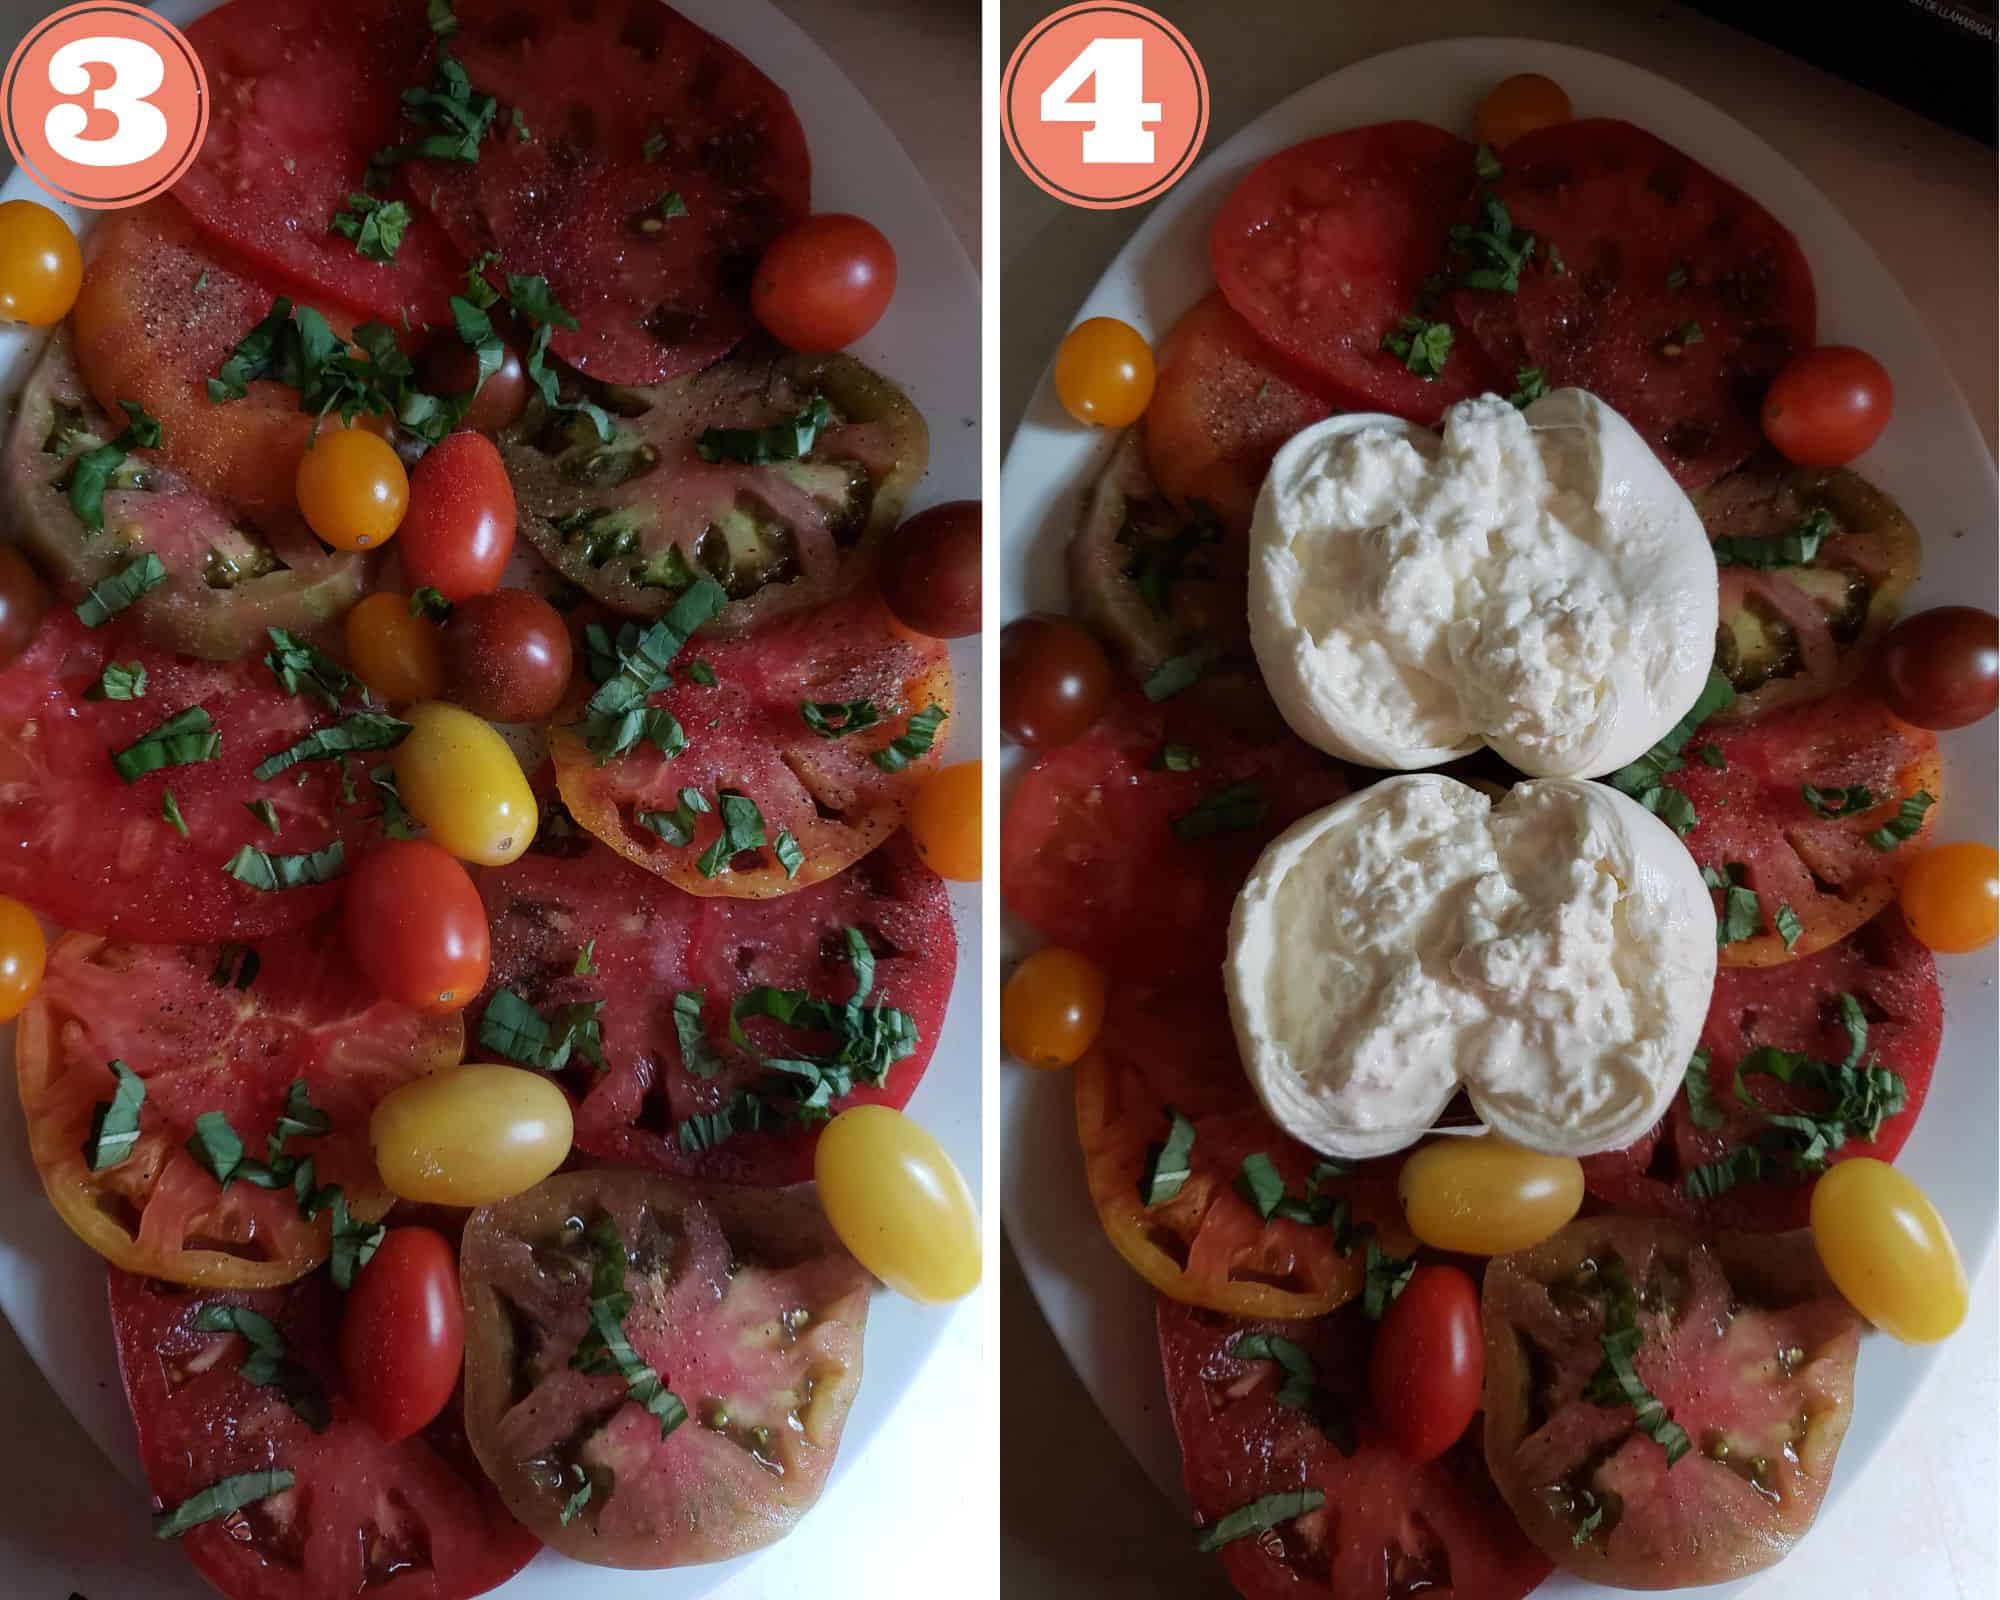 Photos that show adding half of the chopped basil and adding the burrata cheese.